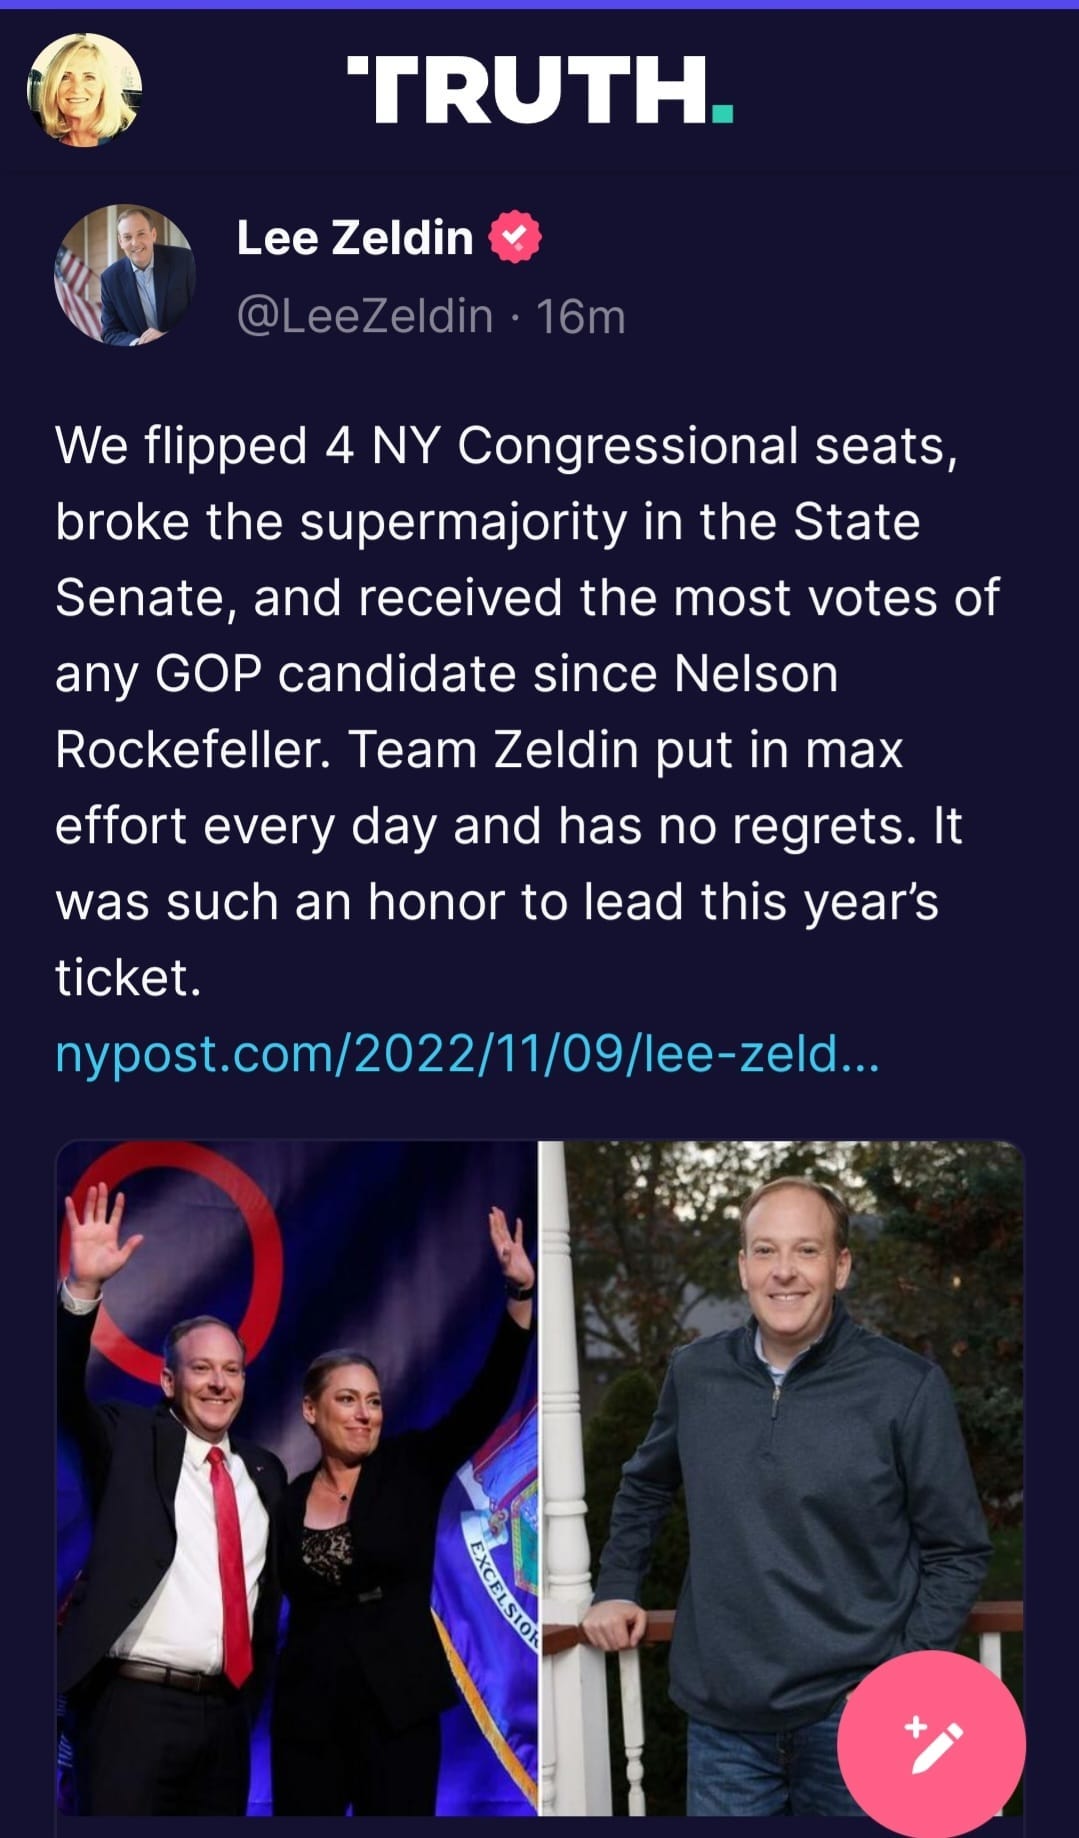 May be an image of 4 people and text that says 'TRUTH. Lee Zeldin @LeeZeldin 16m We flipped 4 NY Congressional seats, broke the supermajority in the State Senate, and received the most votes of any GOP candidate since Nelson Rockefeller. Team Zeldin put in max effort every day and has no regrets. It was such an honor to lead this year's ticket. nypost.cm/2/11/0/leze..'